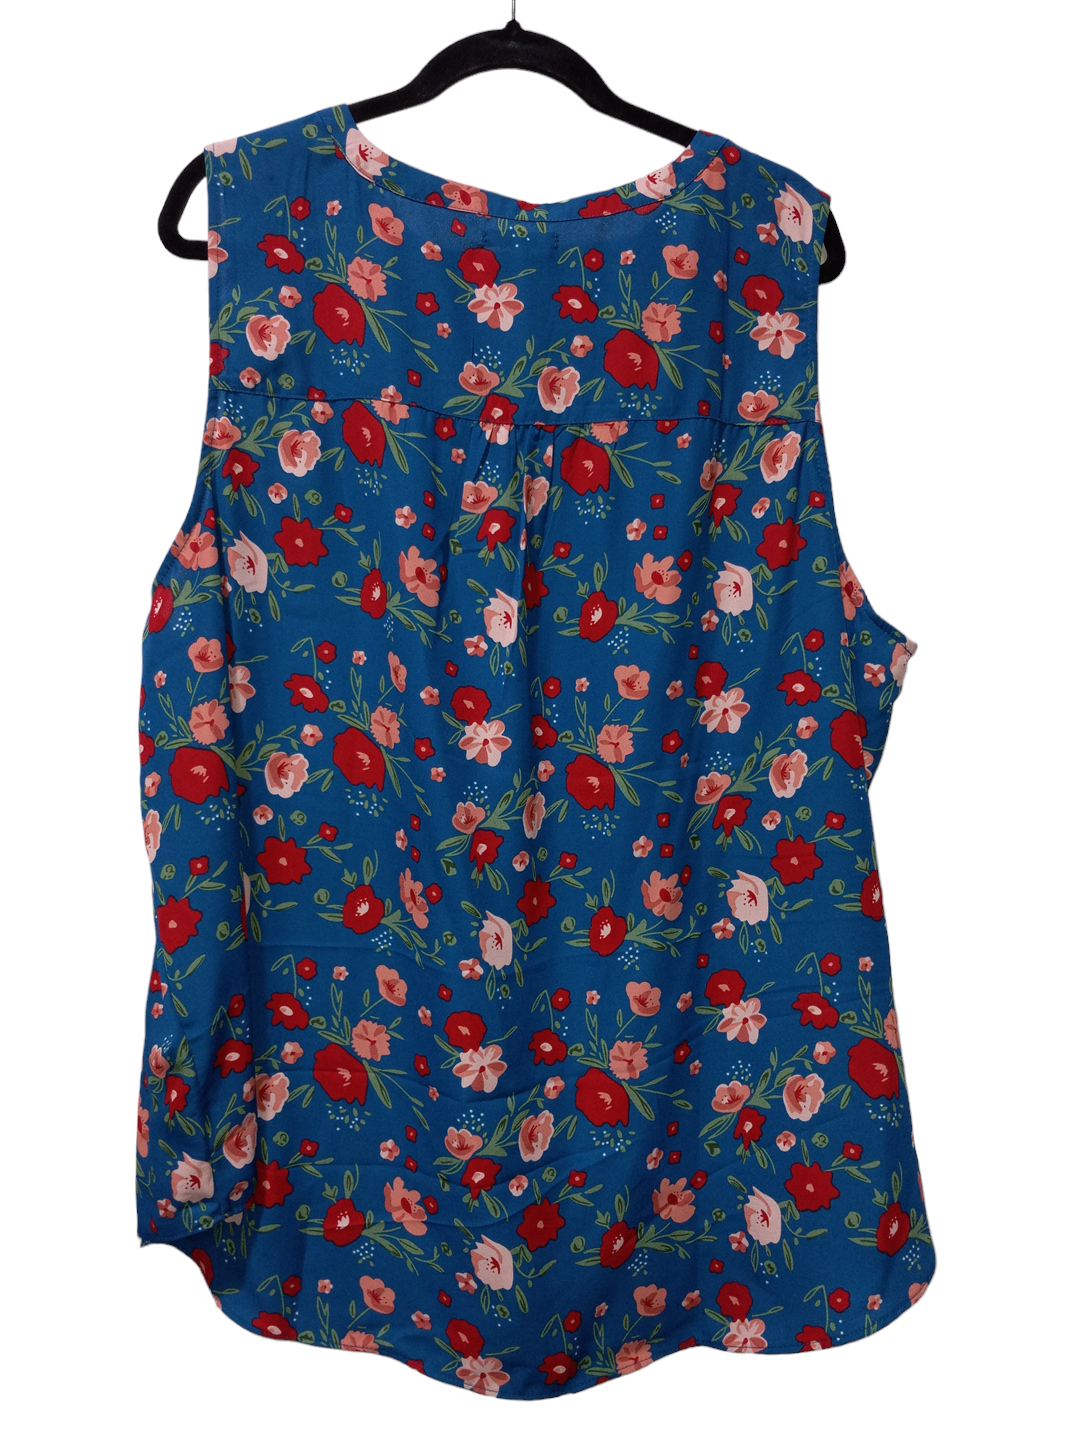 Floral Print Blouse Sleeveless Maurices, Size 3x